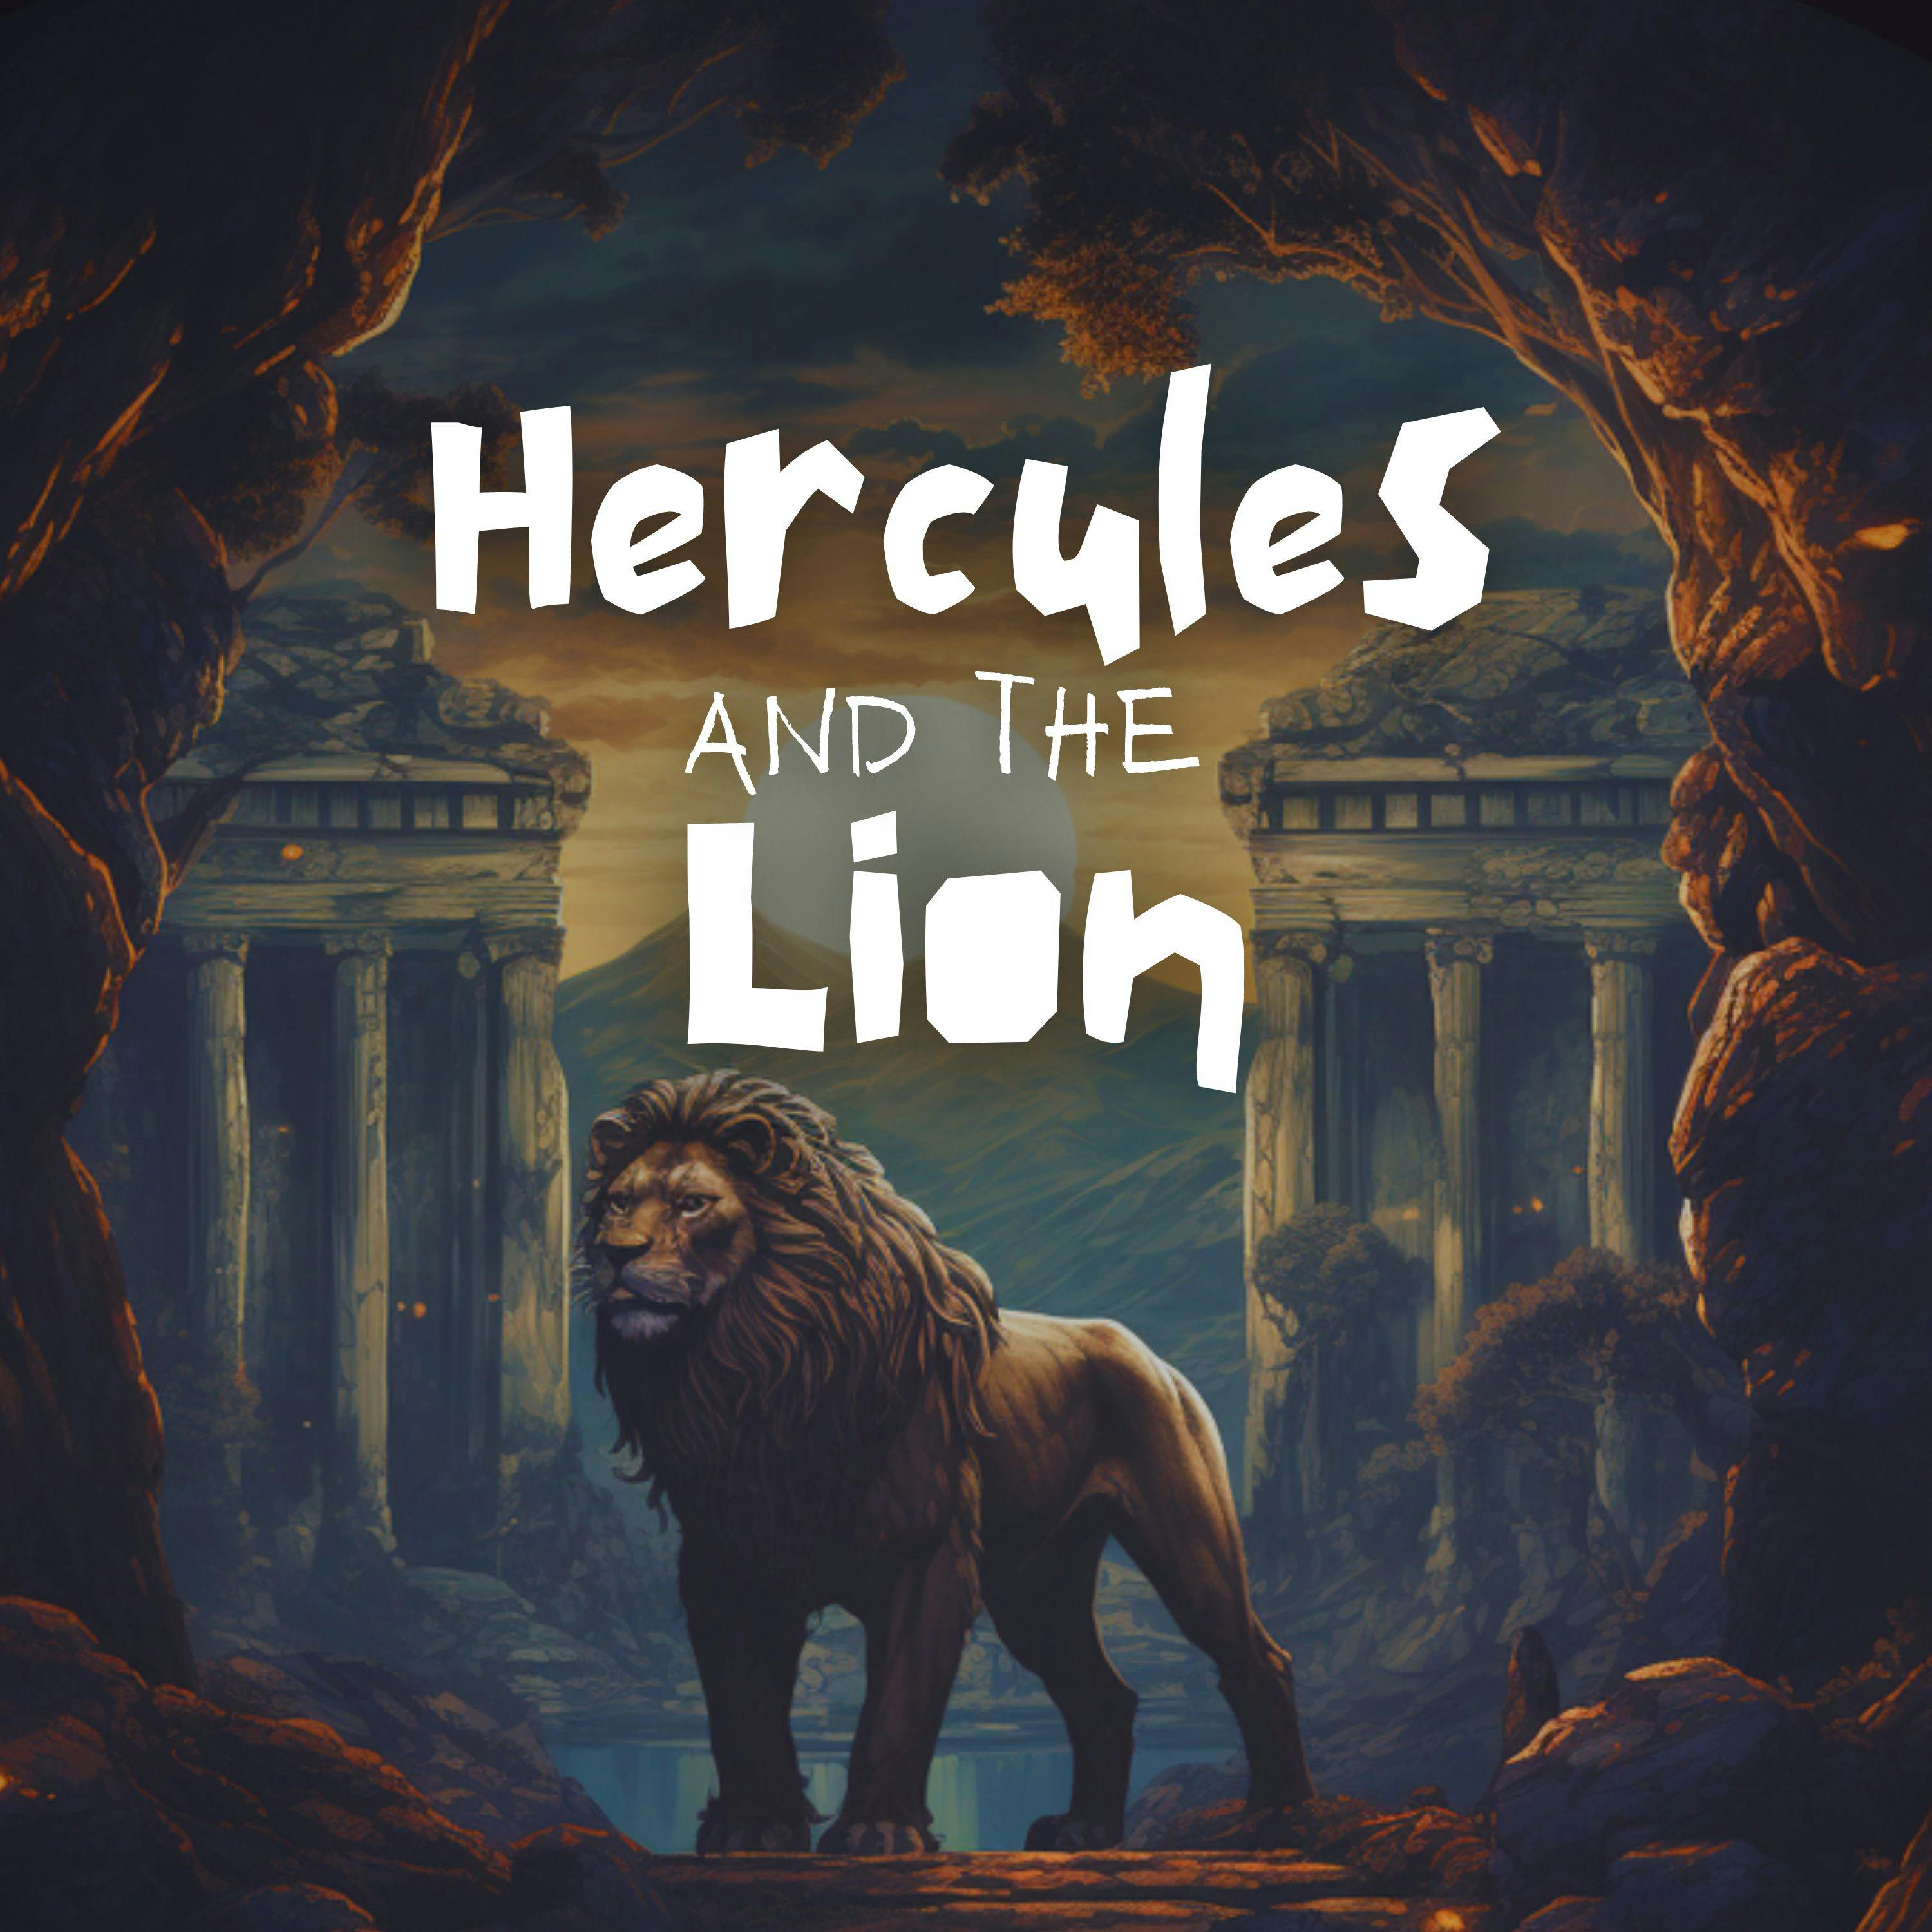 Hercules and the Lion